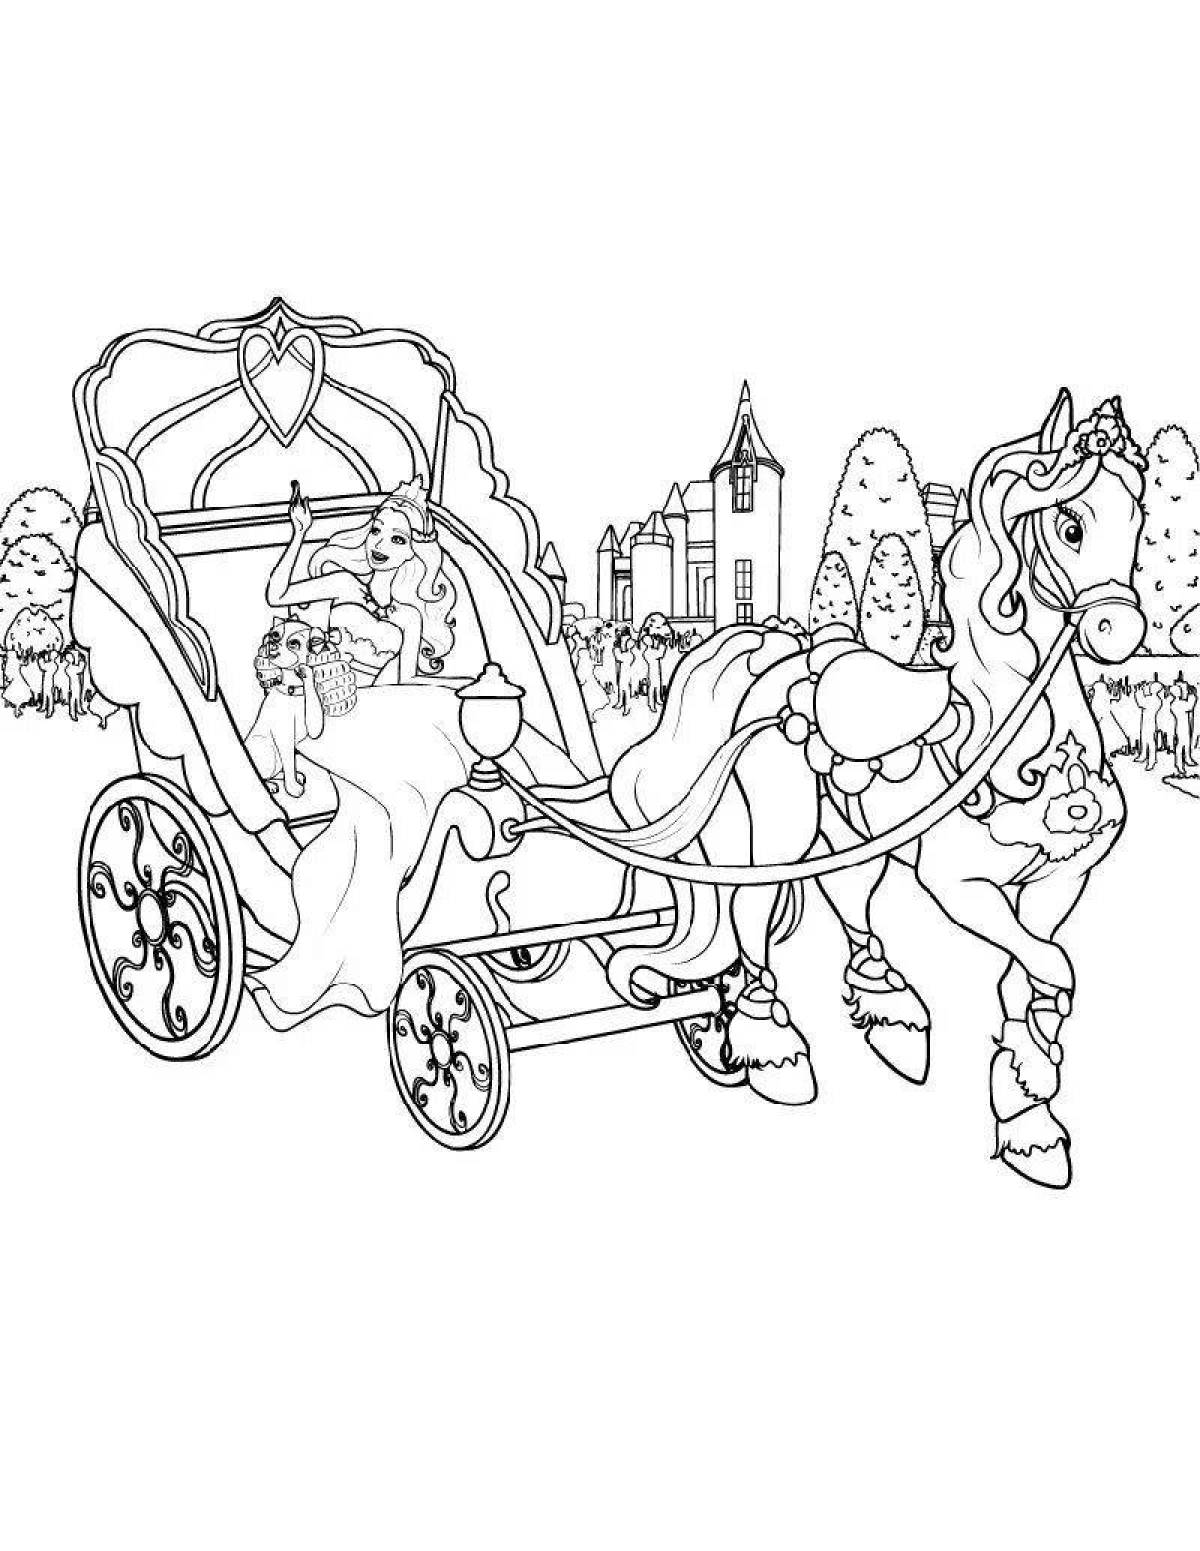 Coloring page glamor horse carriage